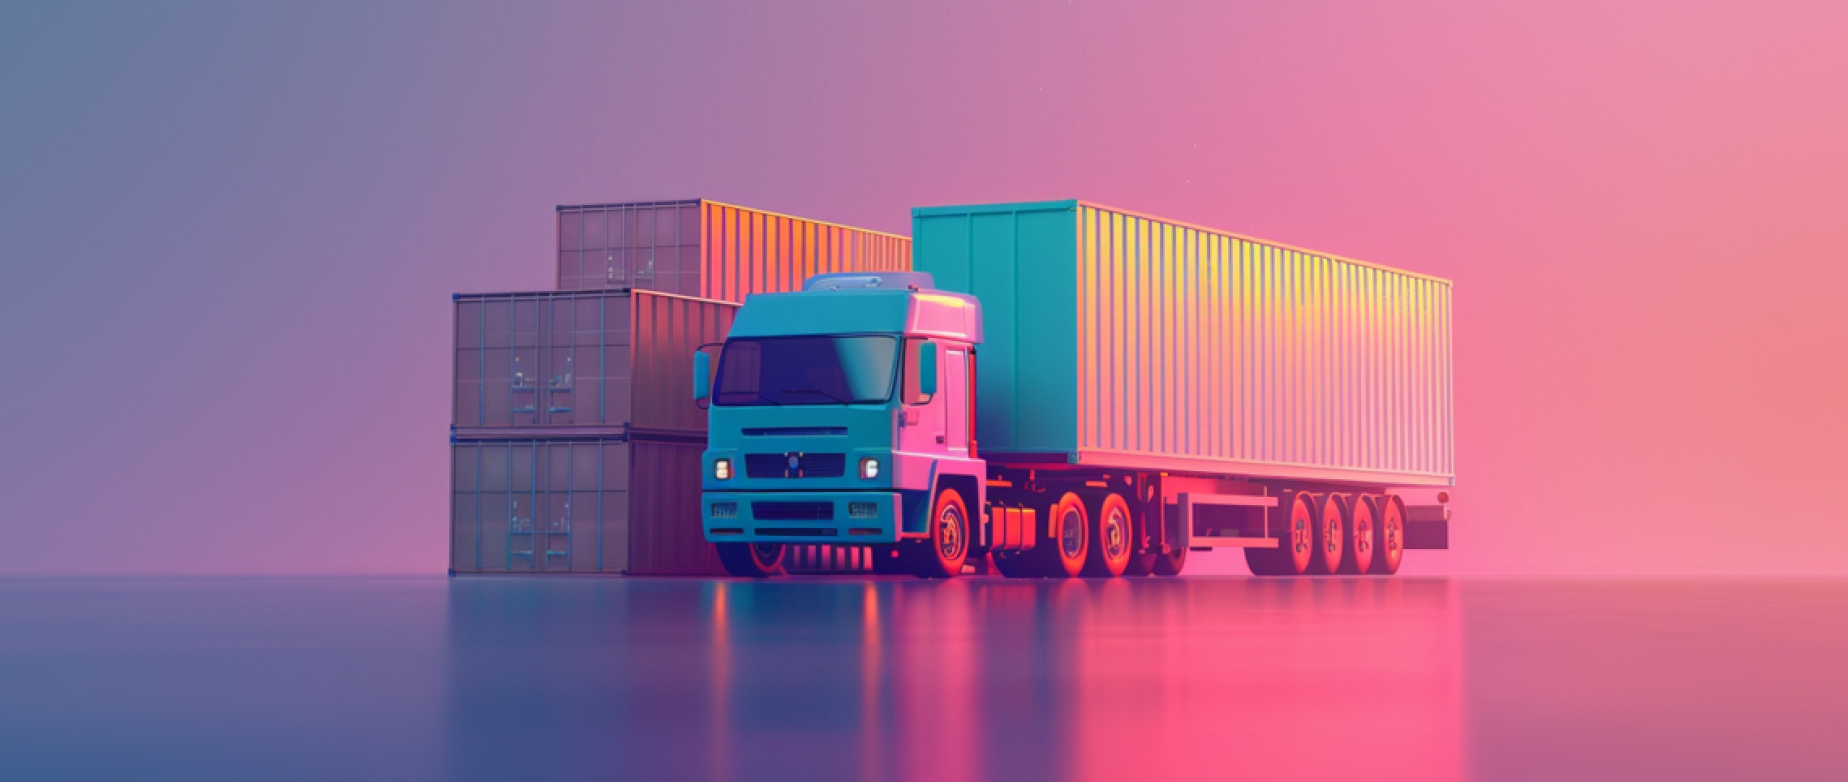 A truck parked next to shipping containers on a pink and blue background.